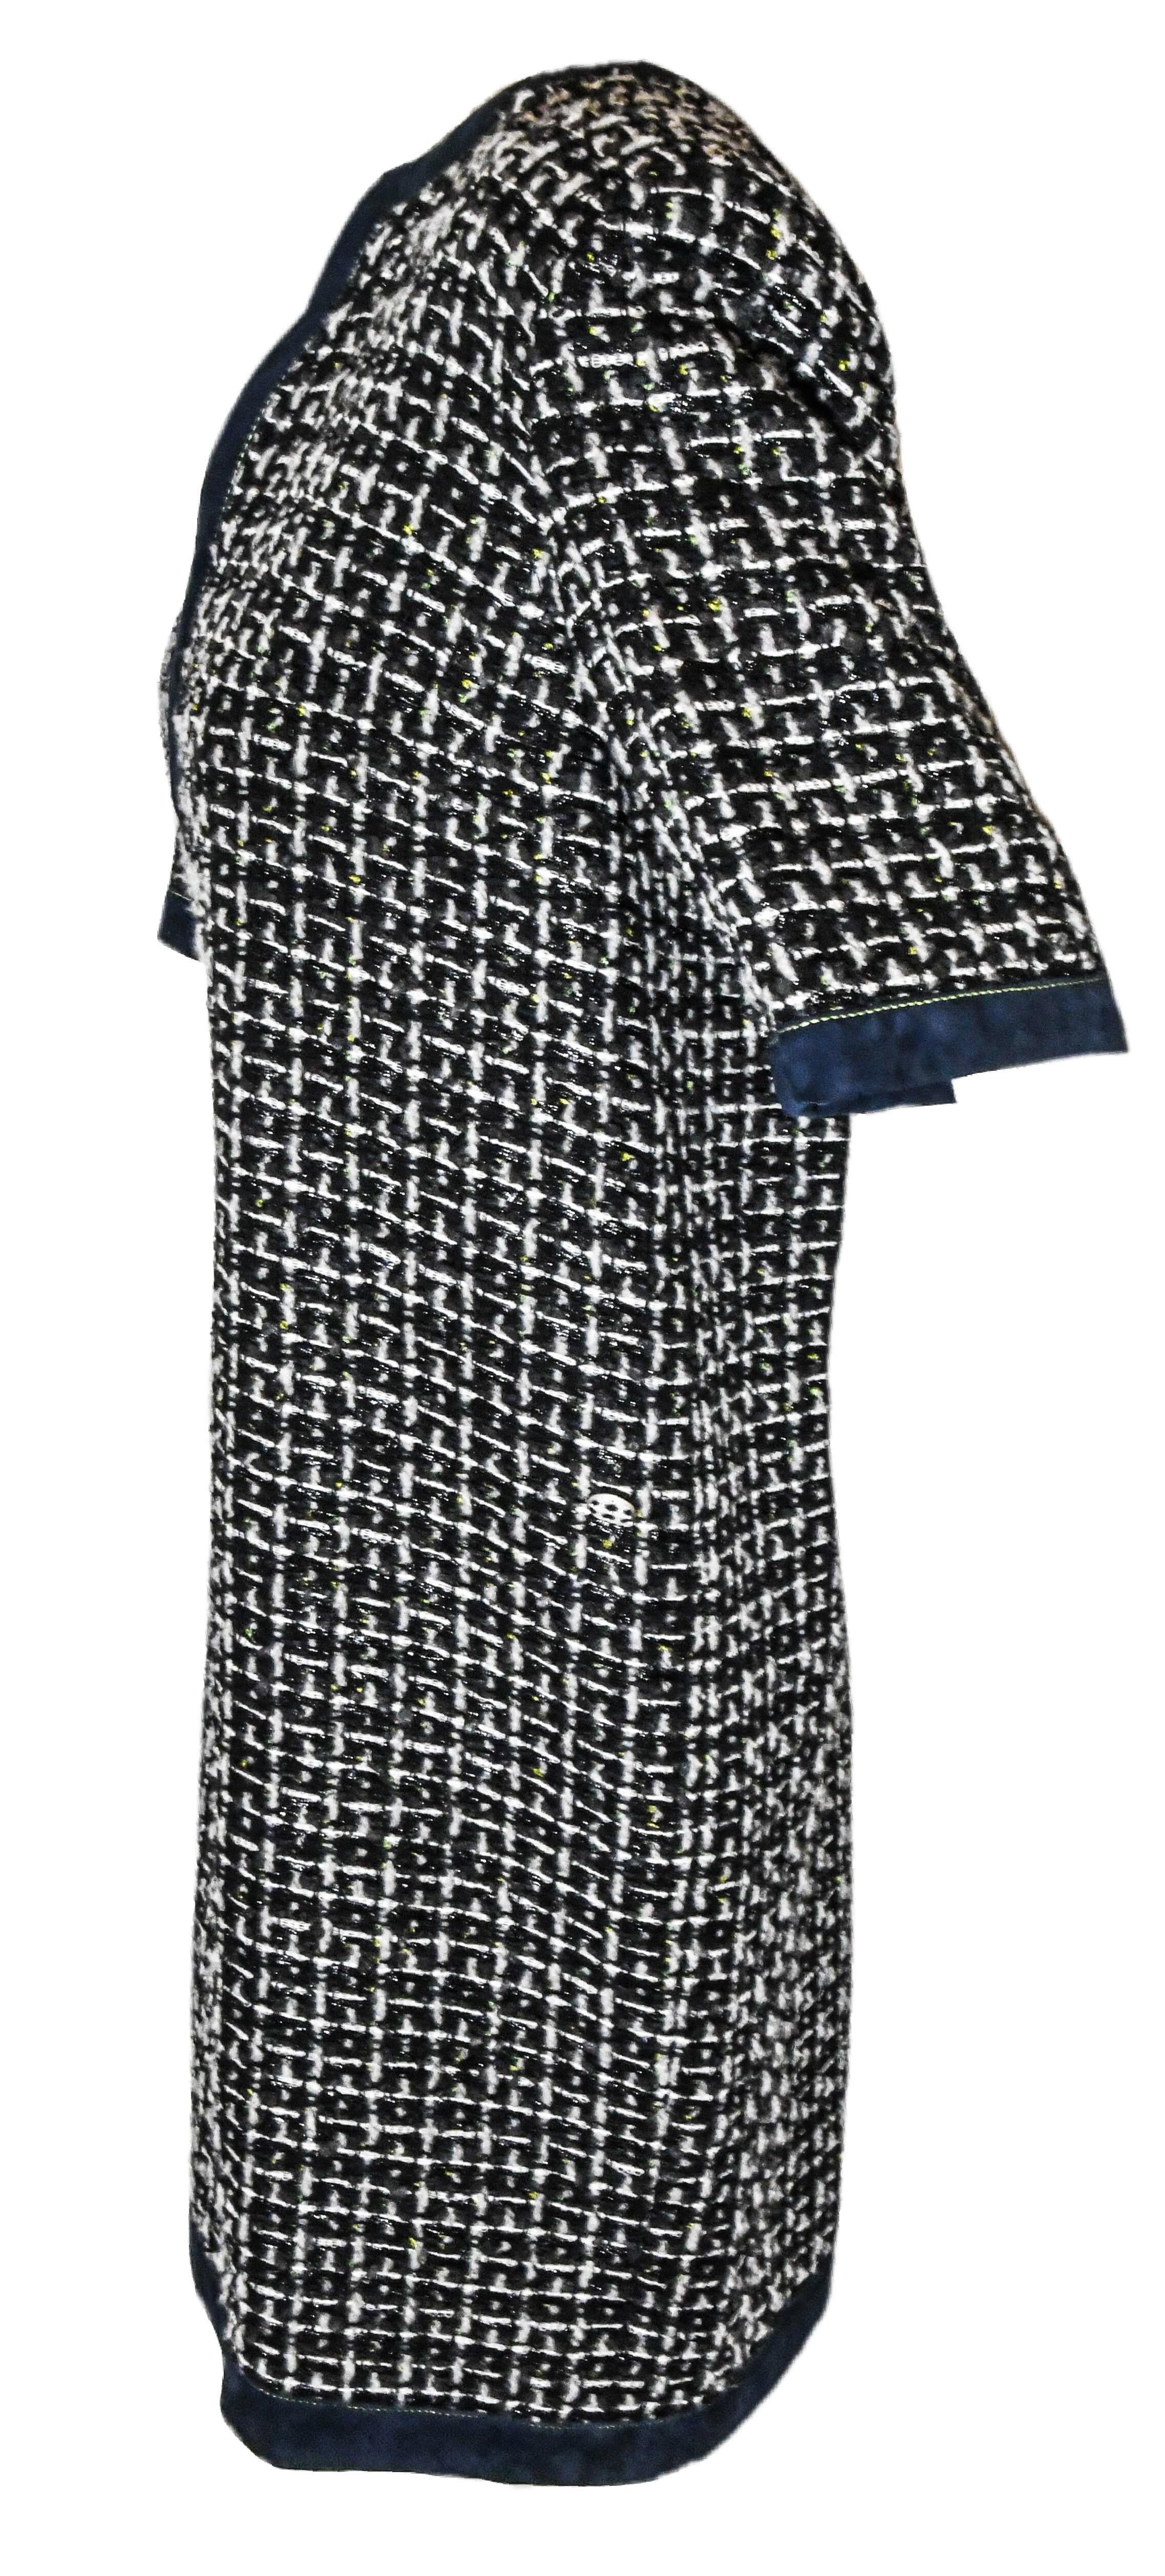 Chanel Navy and White Check Tweed Short Sleeve Dress In Excellent Condition For Sale In Palm Beach, FL